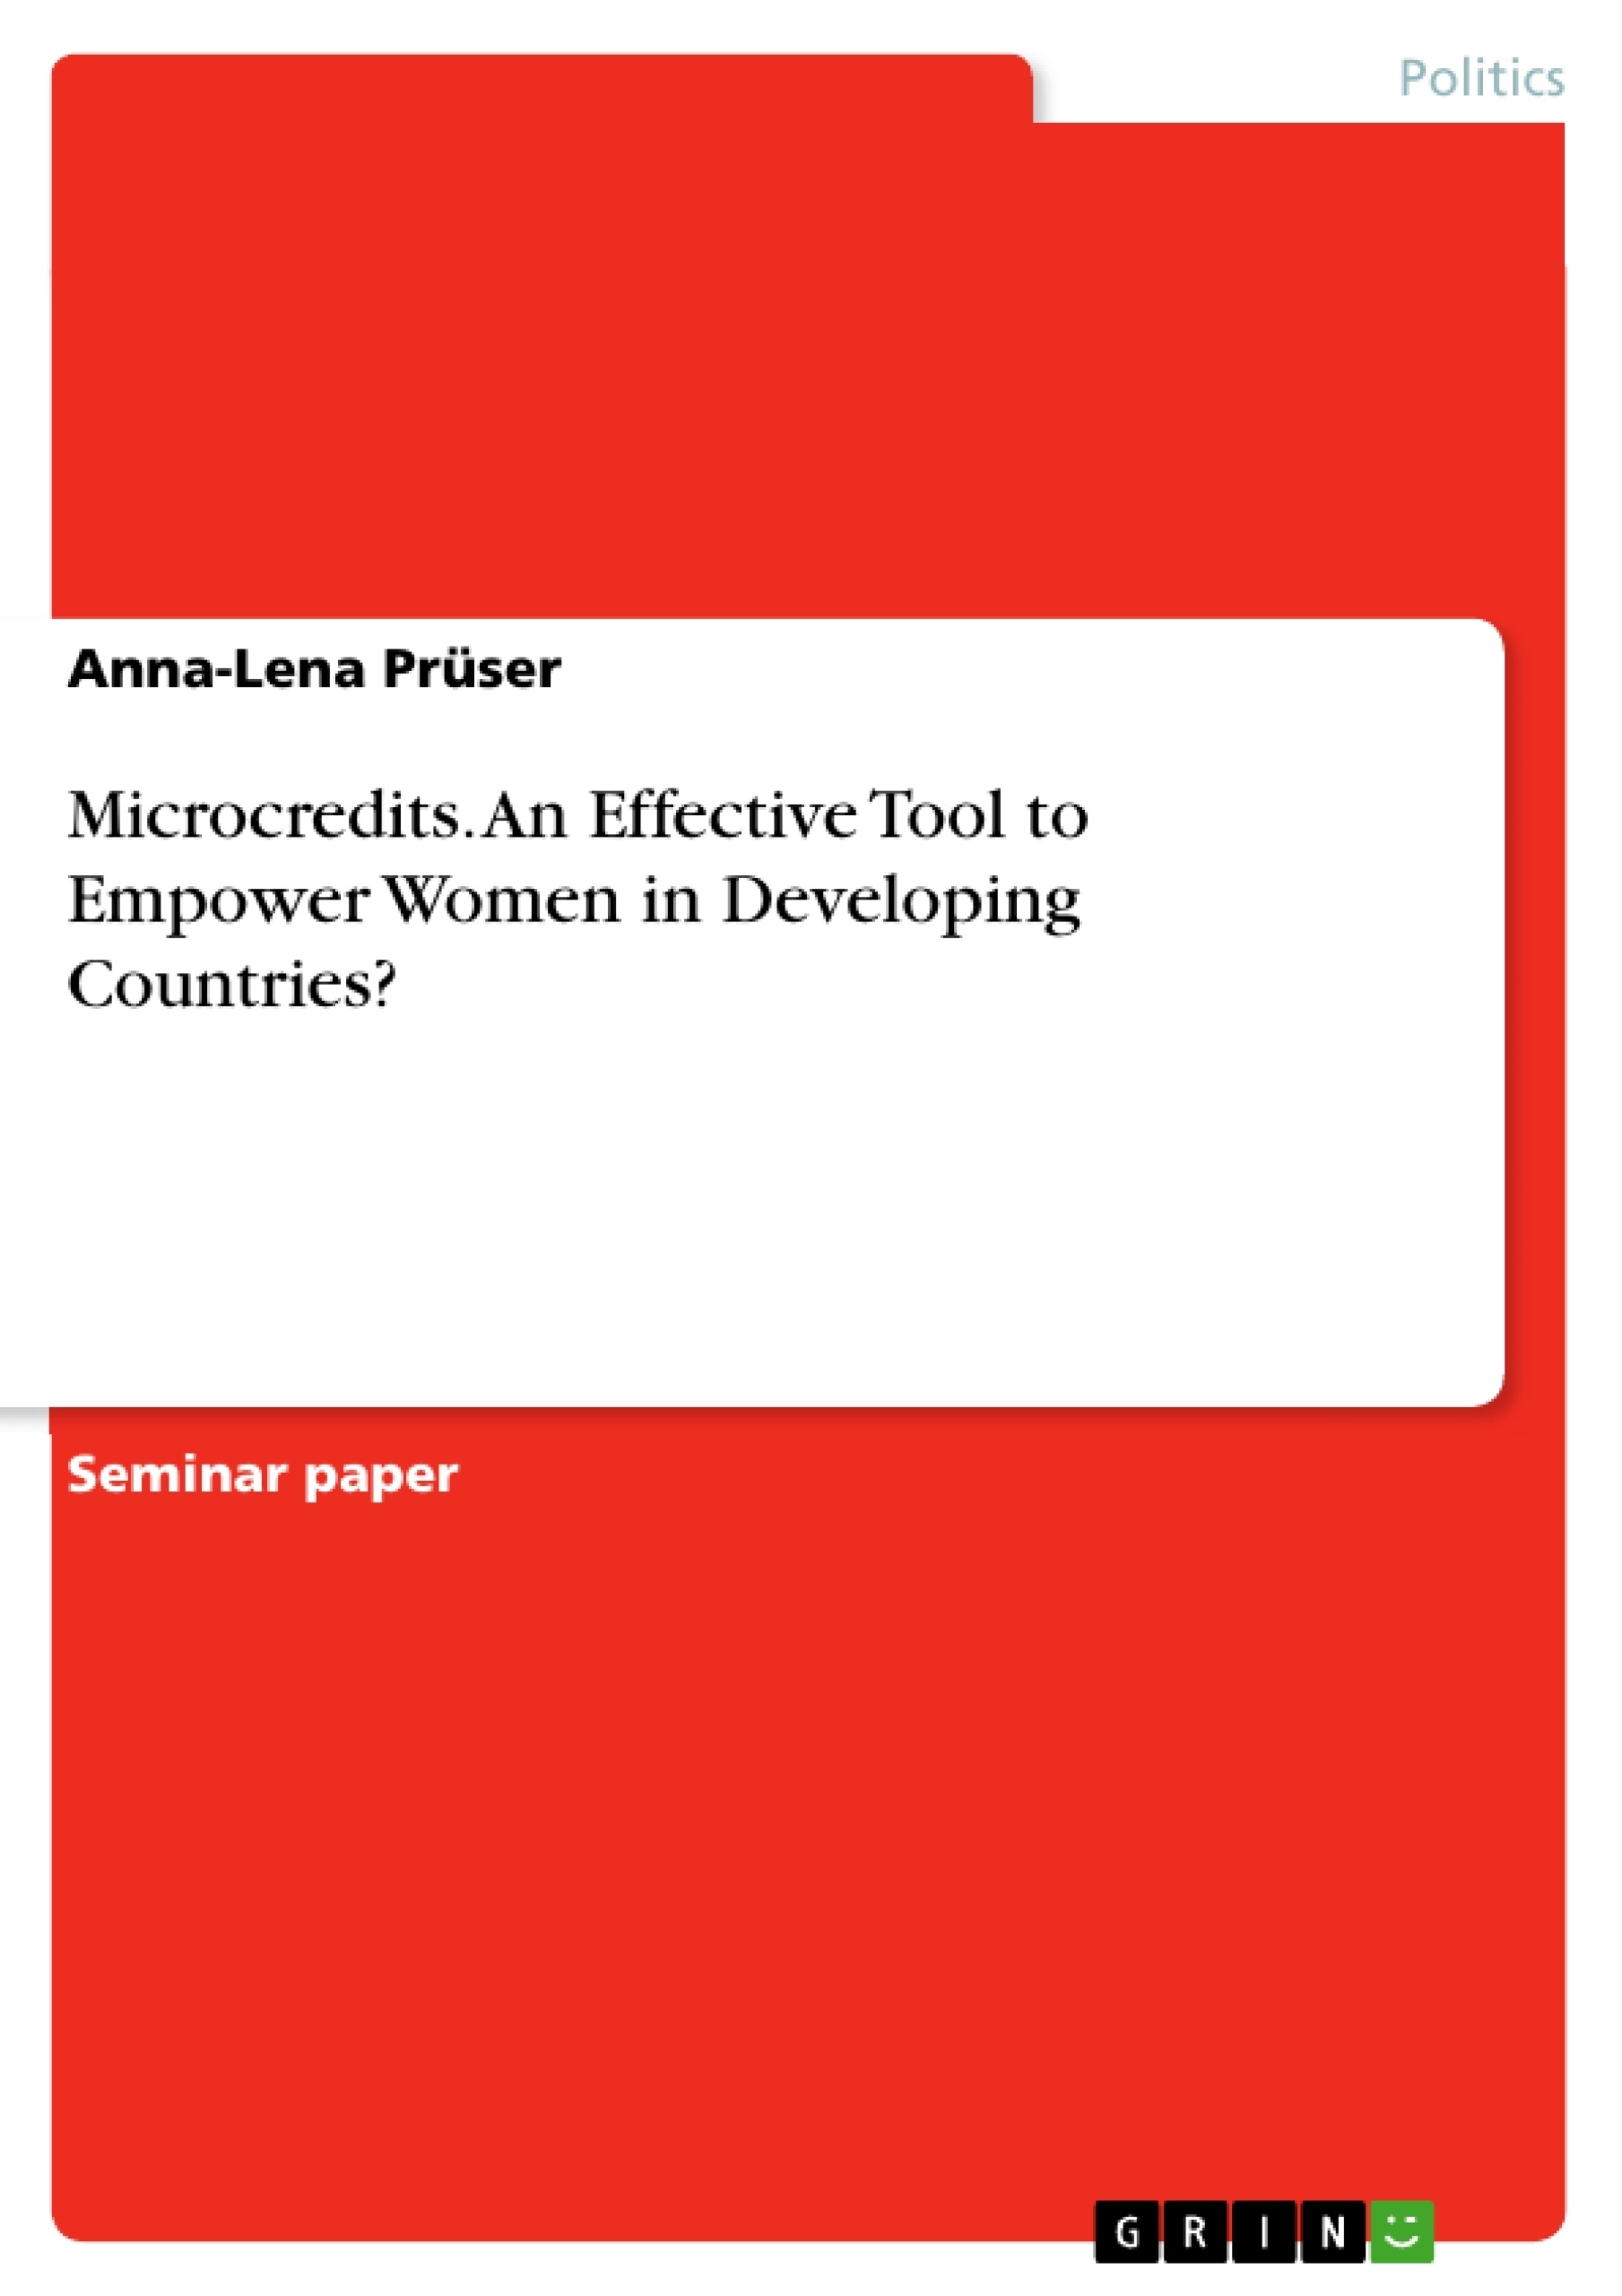 Title: Microcredits. An Effective Tool to Empower Women in Developing Countries?